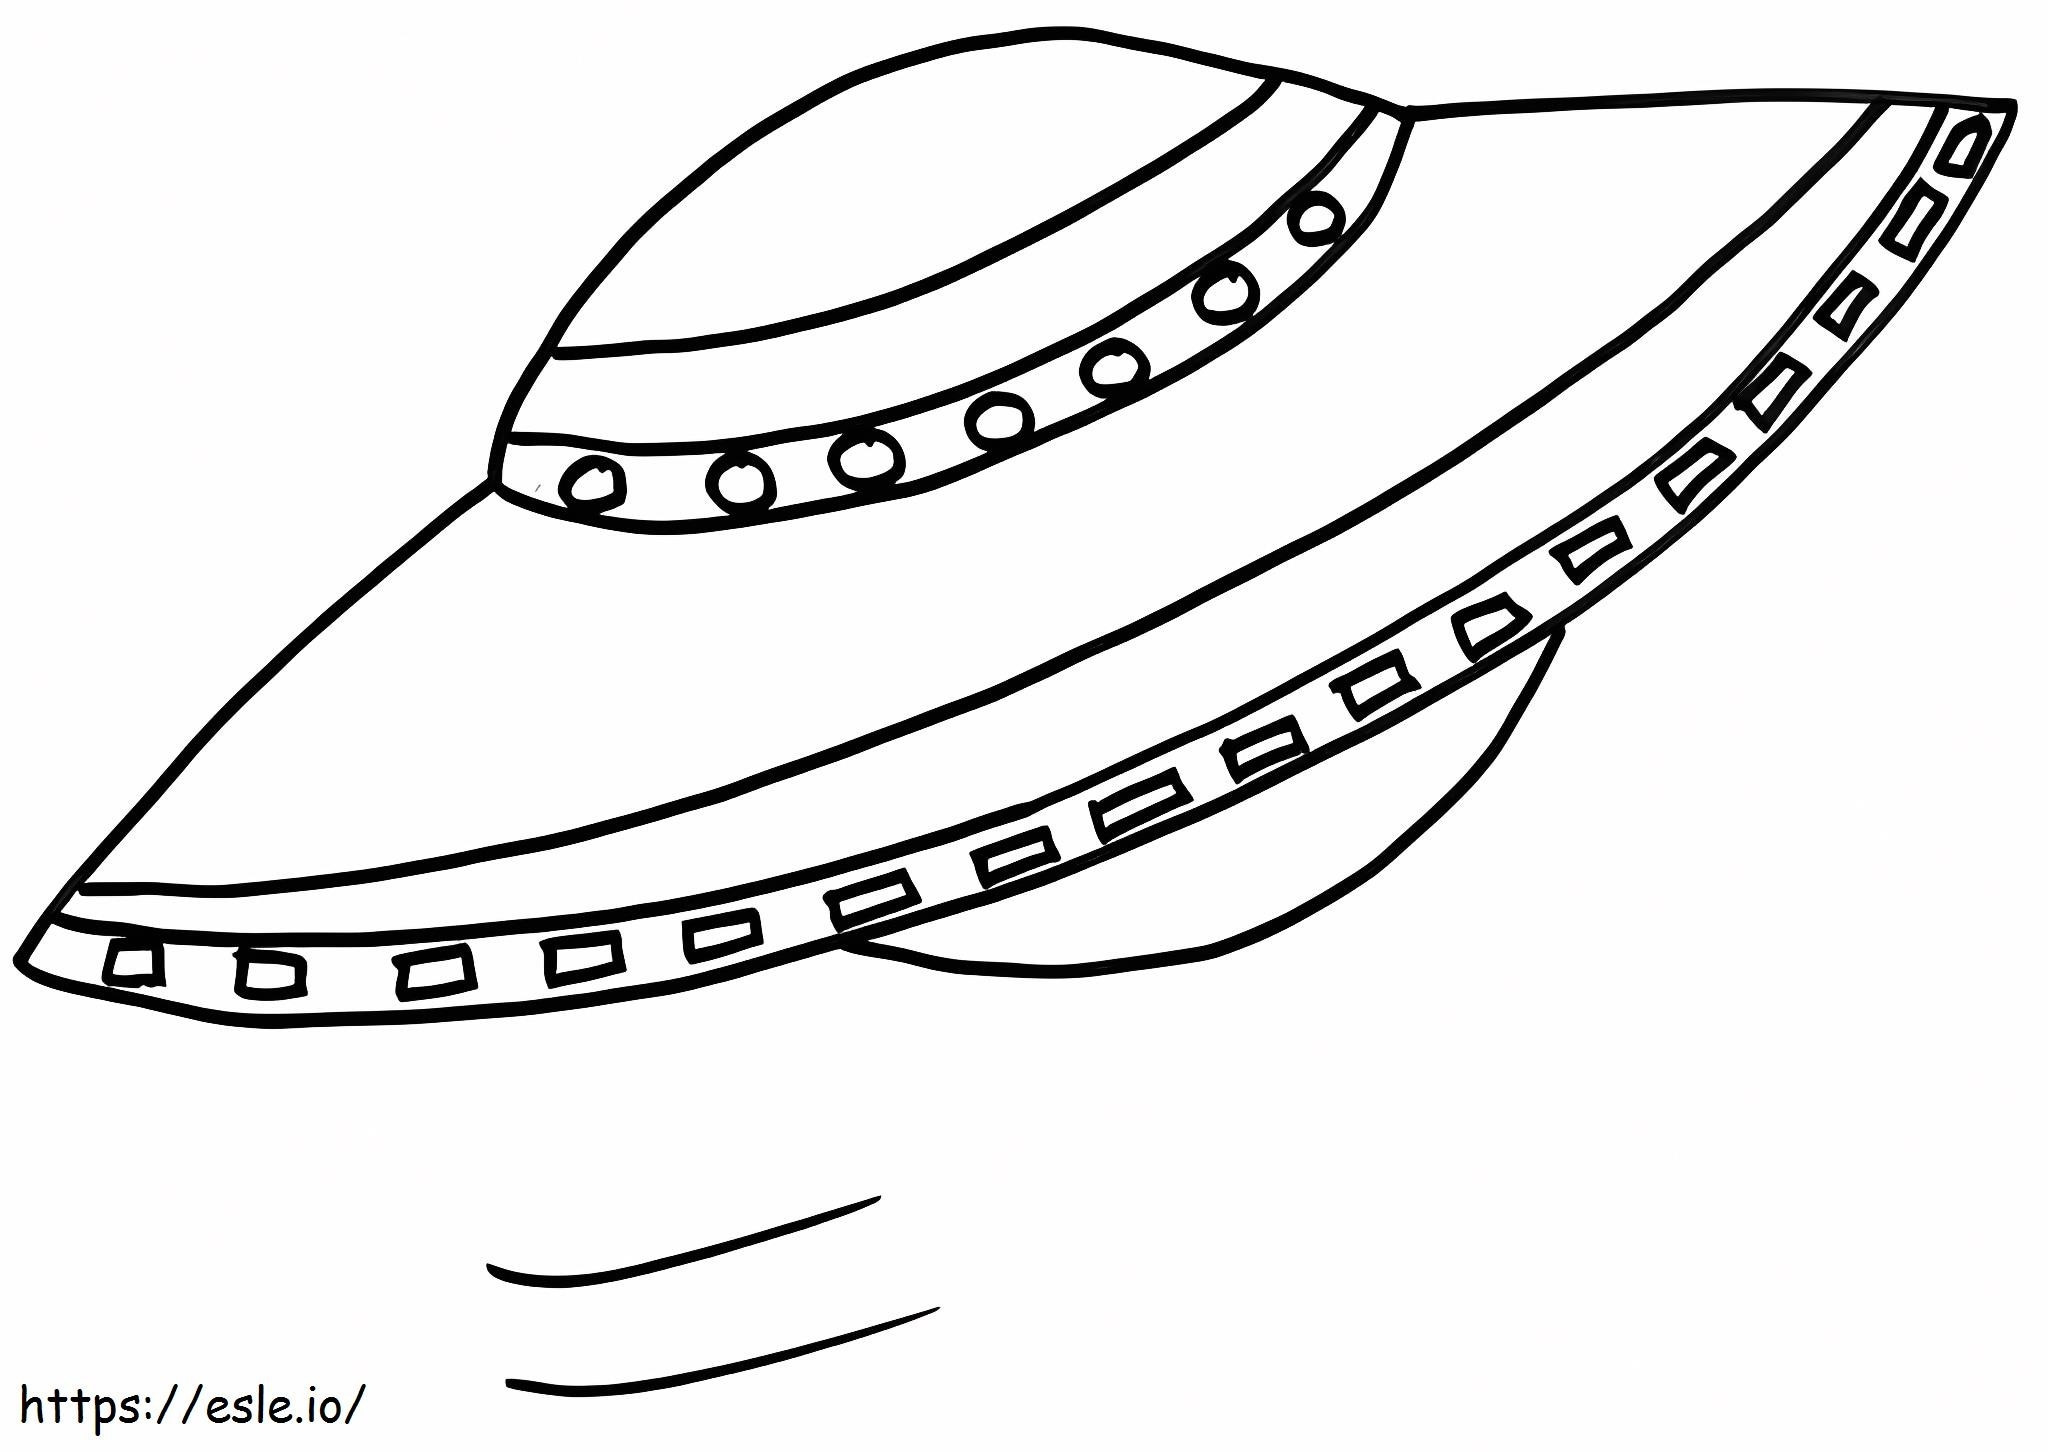 Basic UFO coloring page